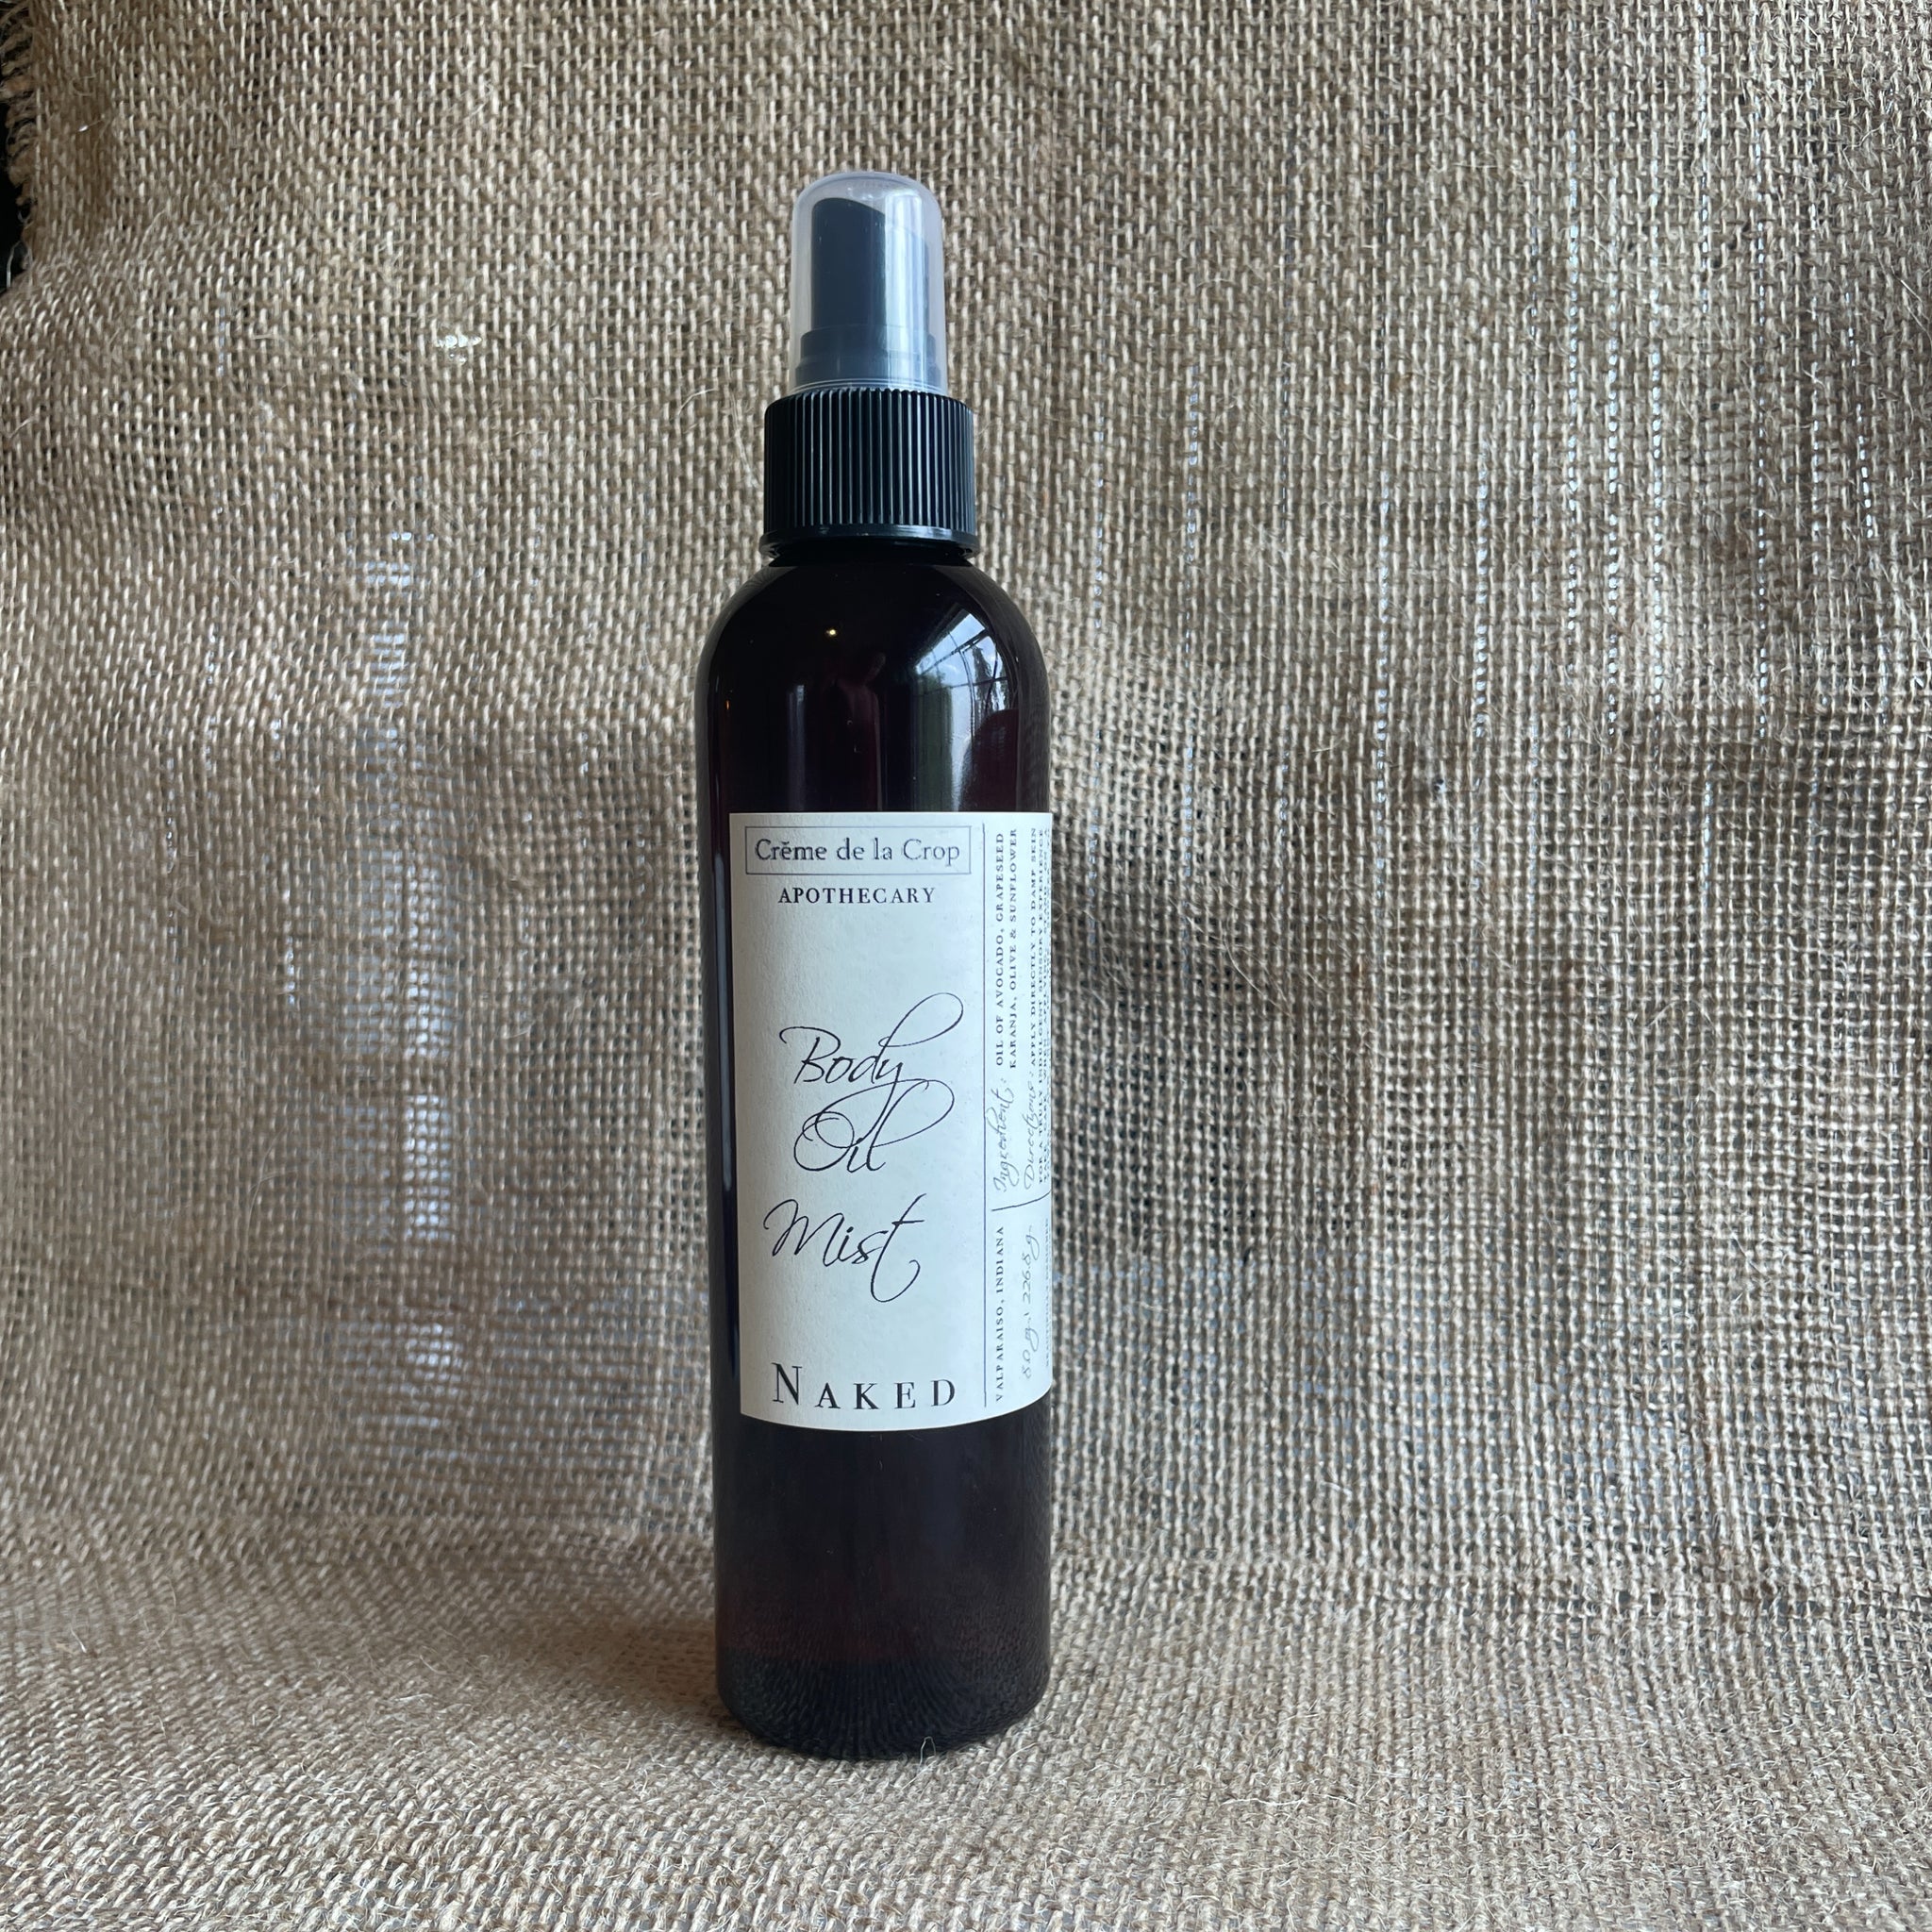 body oil mist naked Olive, Karanja, Avocado, Grapeseed, and Sunflower front